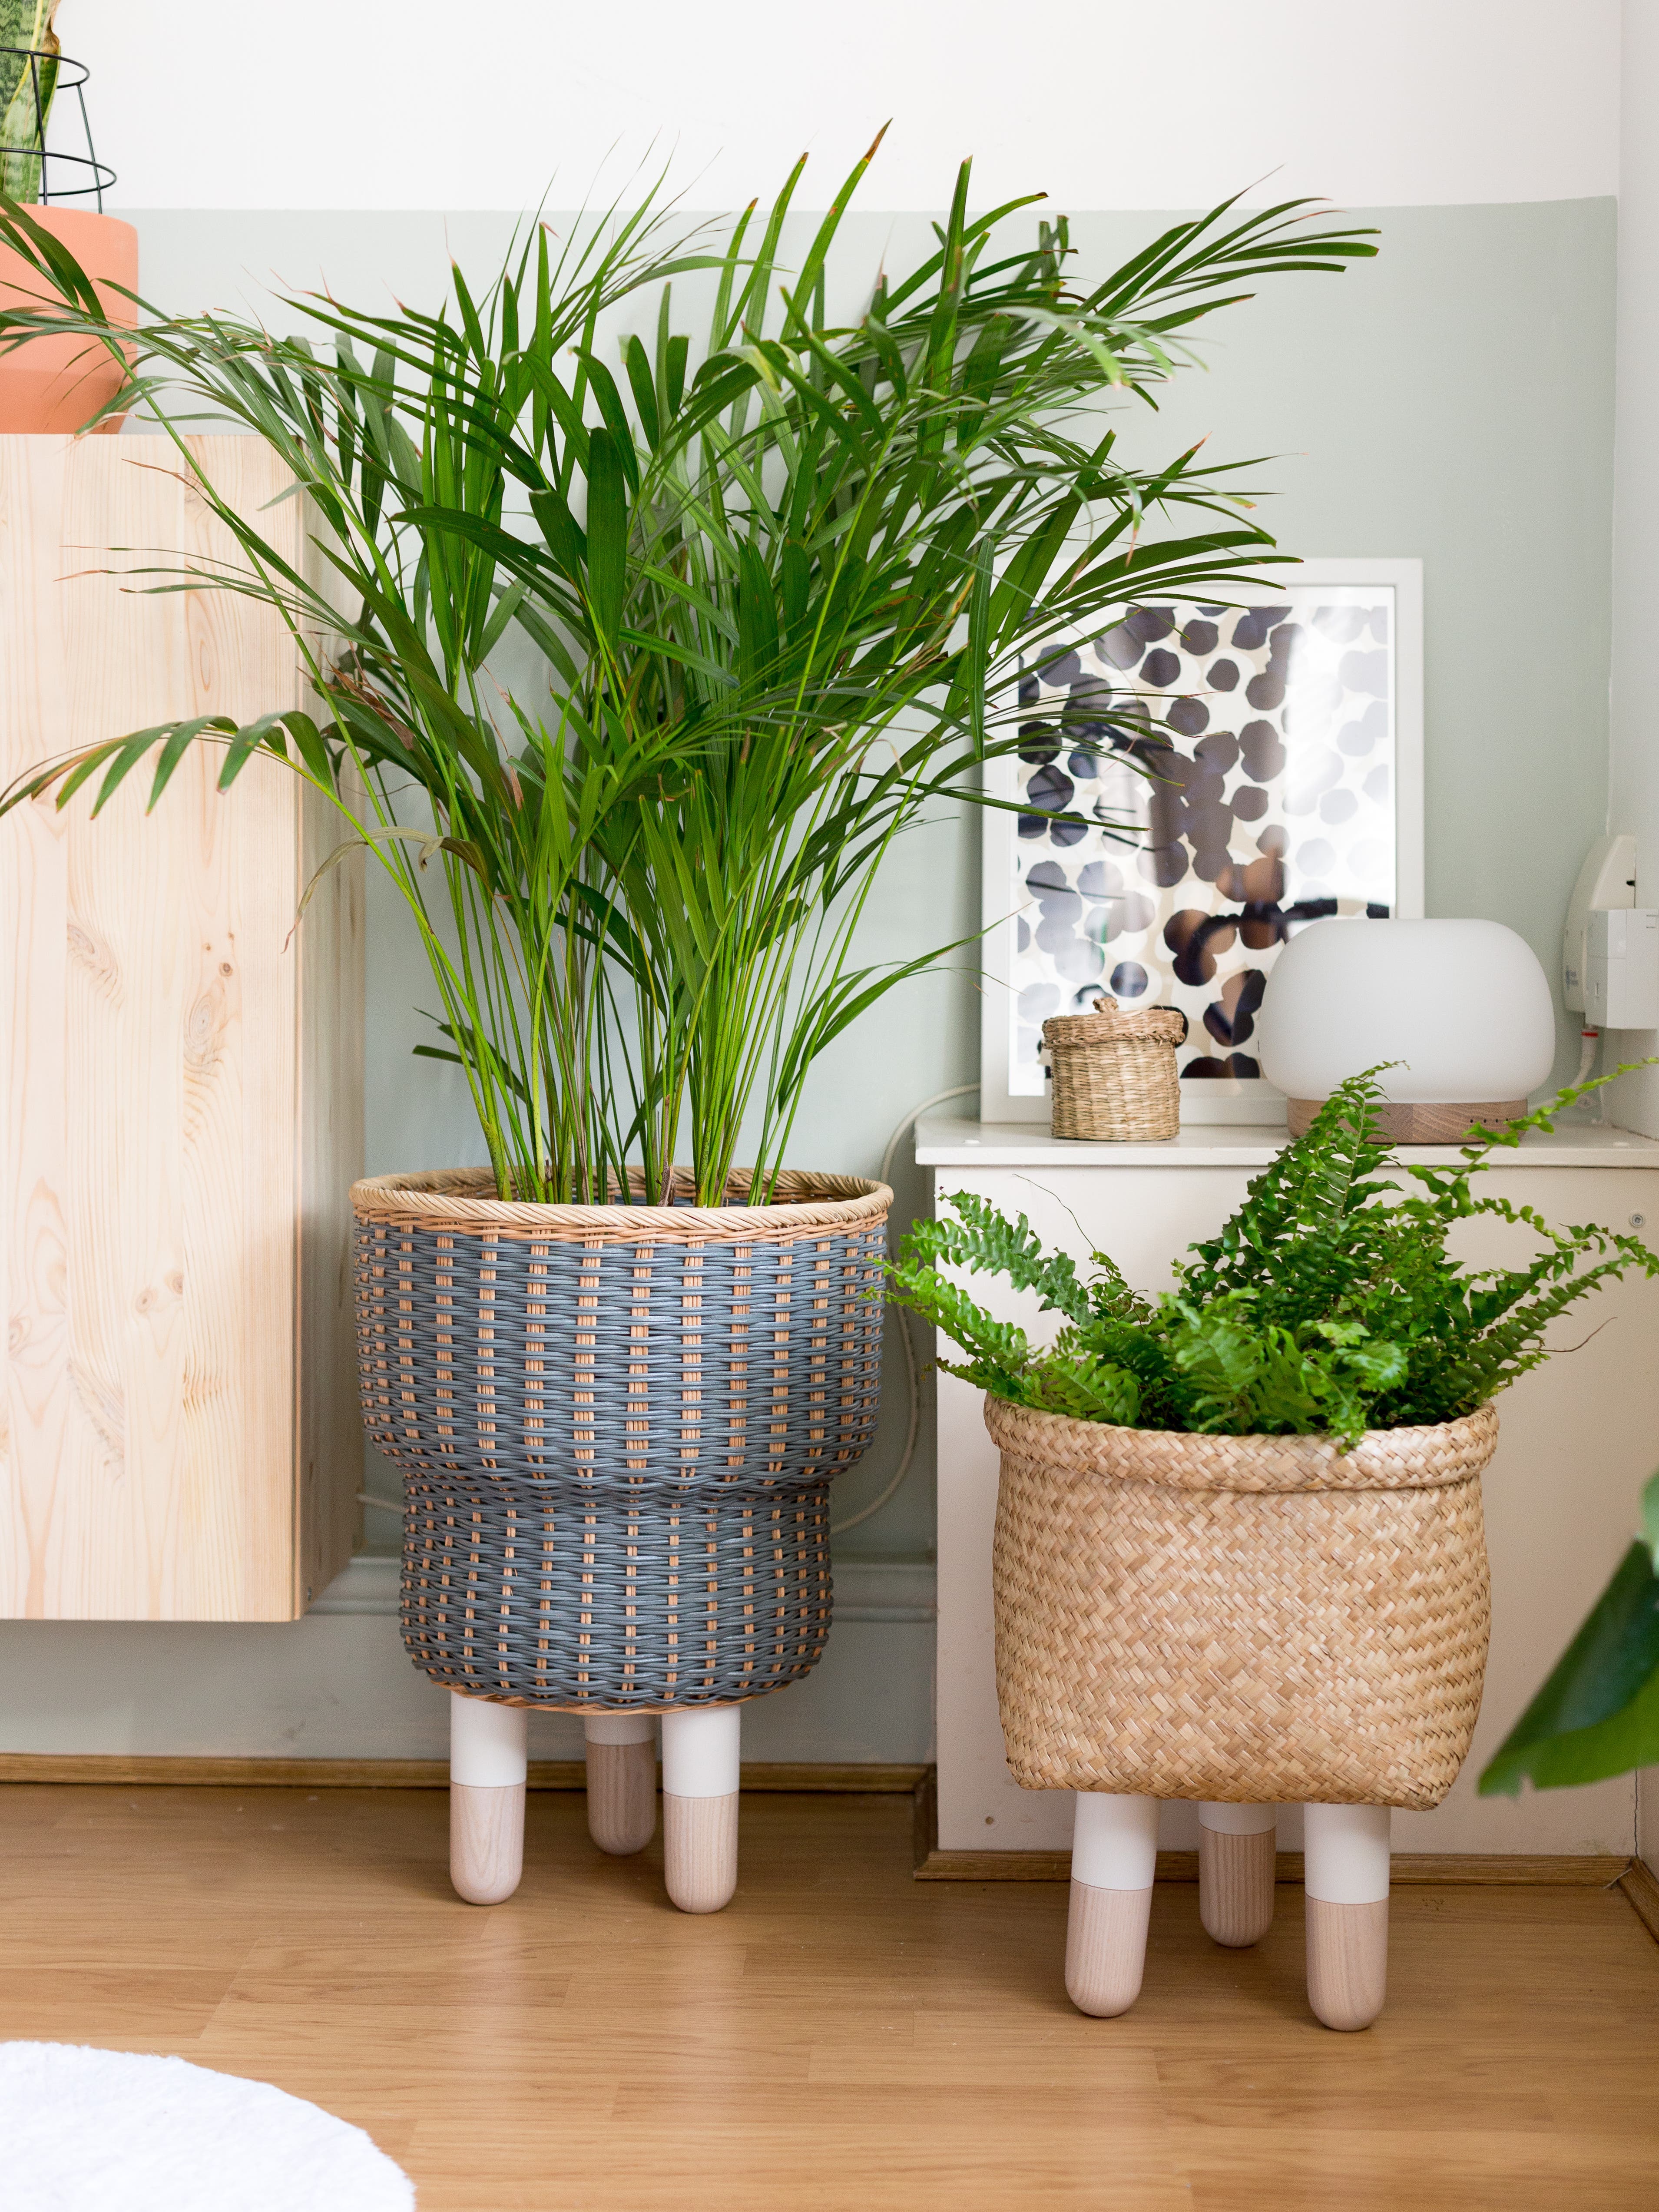 6 DIY Plant Displays to Take Your Green Scene to the Next Level